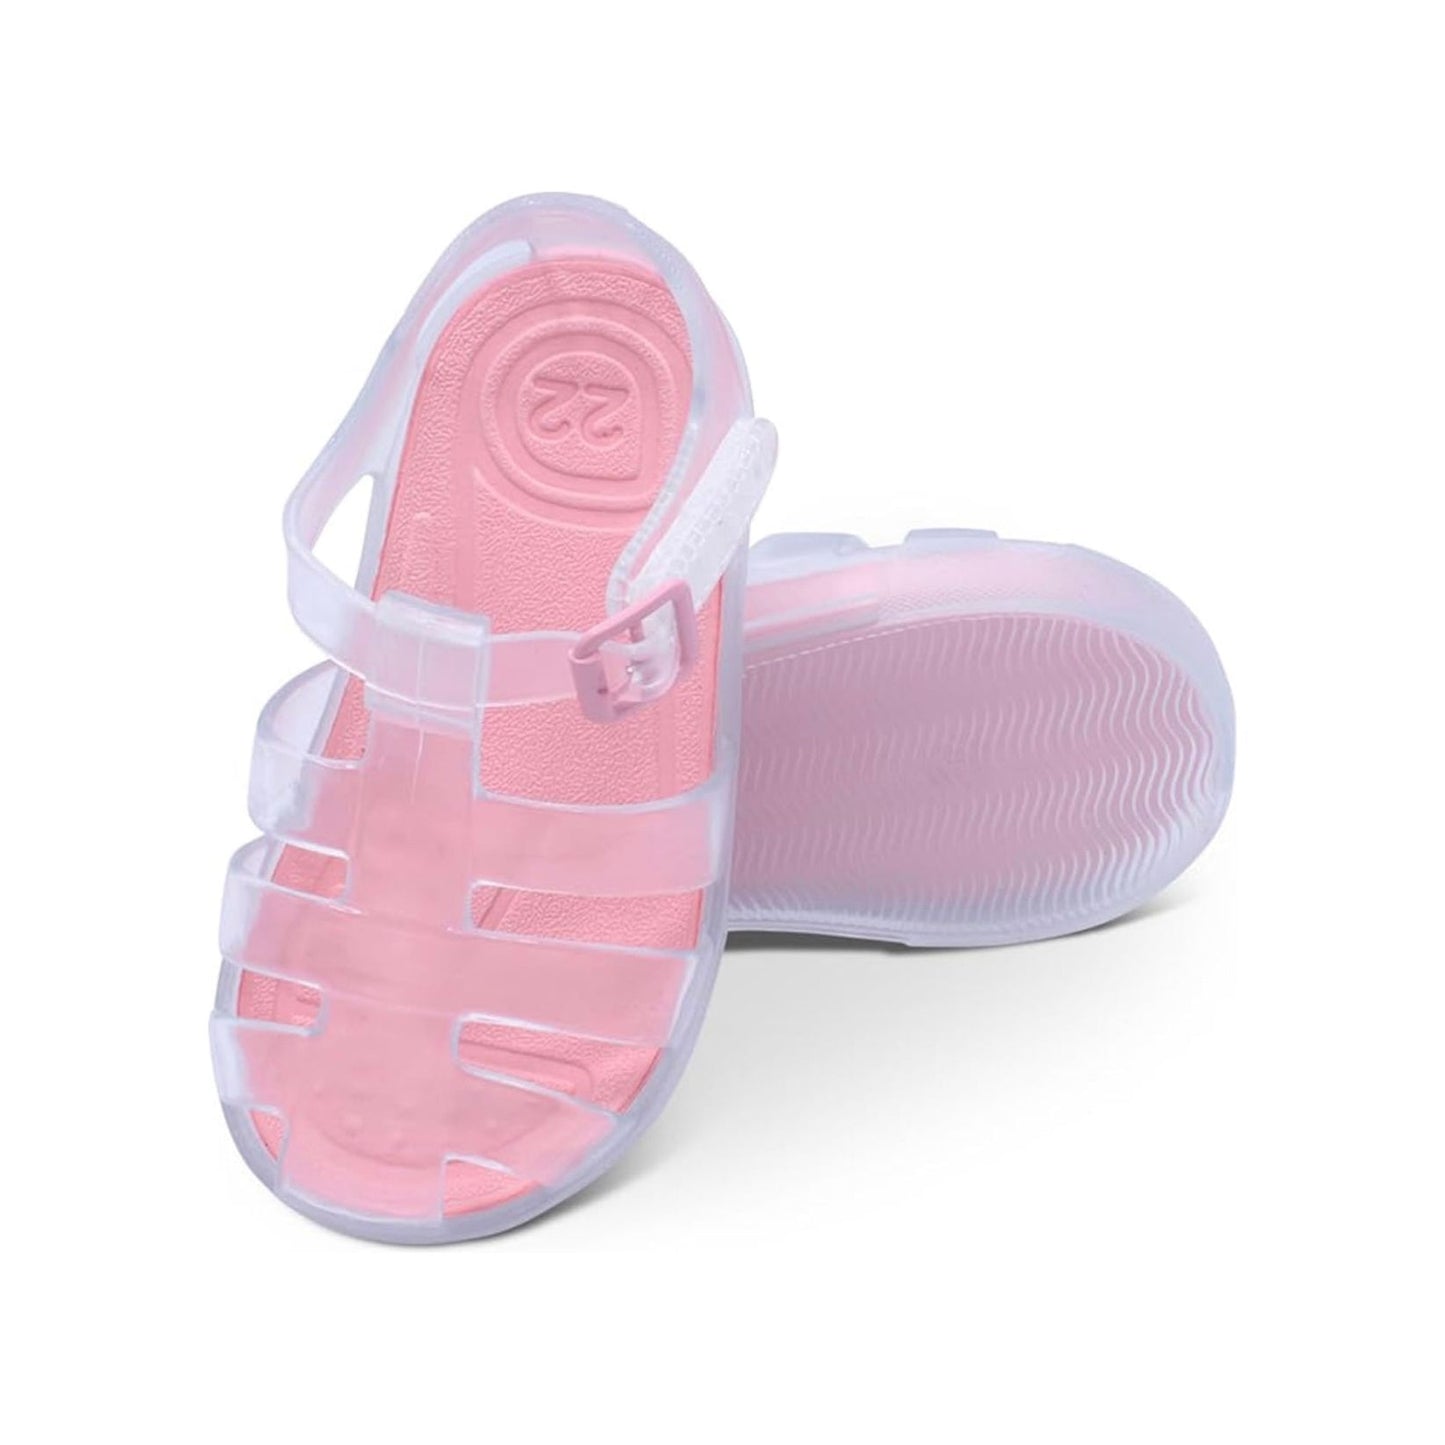 Marena jelly sandals with pink insole - Adora